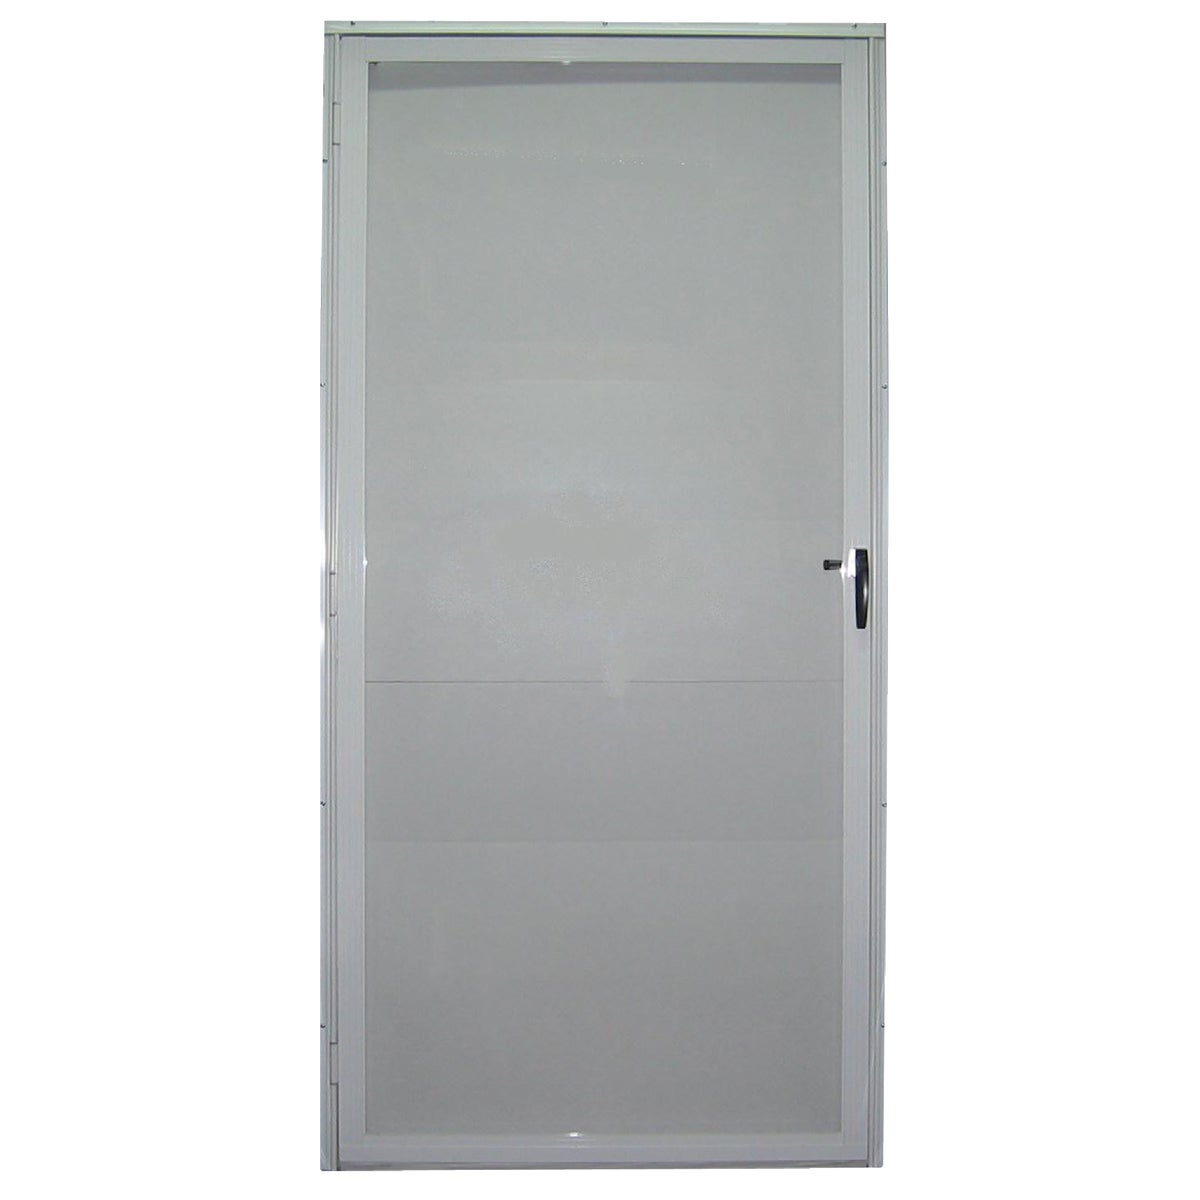 Item 179698, High tensile strength aluminum storm door that adds quality protection to 